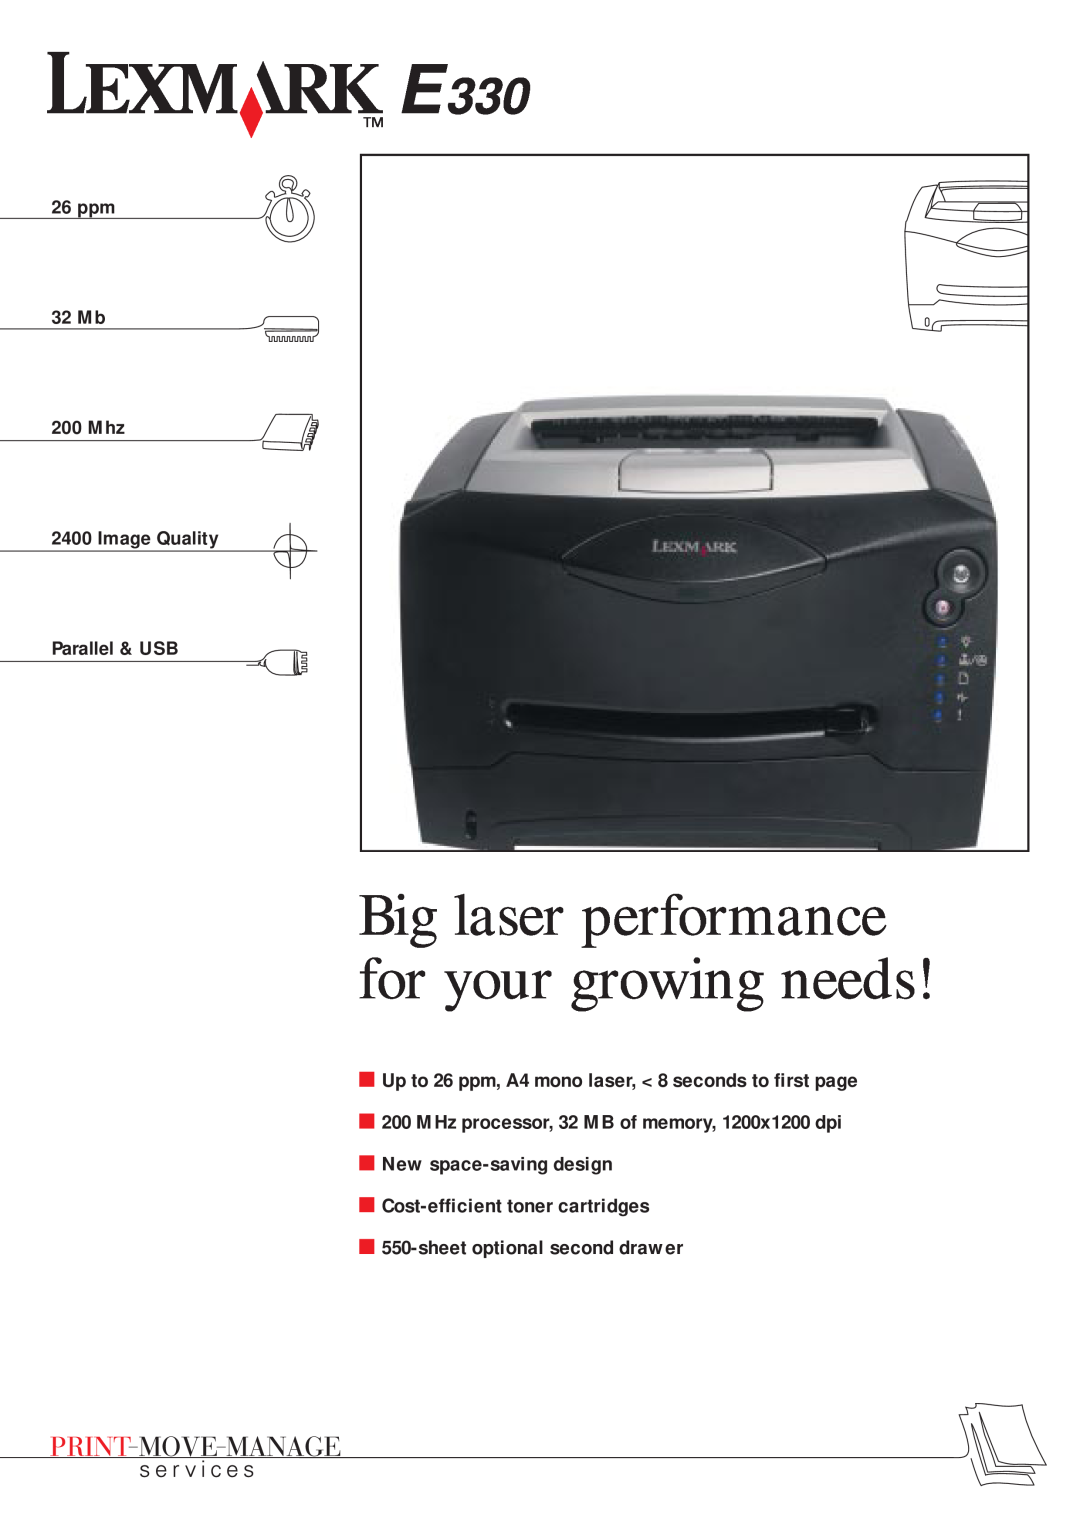 Lexmark E 330 manual ppm 32 Mb 200 Mhz 2400 Image Quality Parallel & USB, Big laser performance for your growing needs 